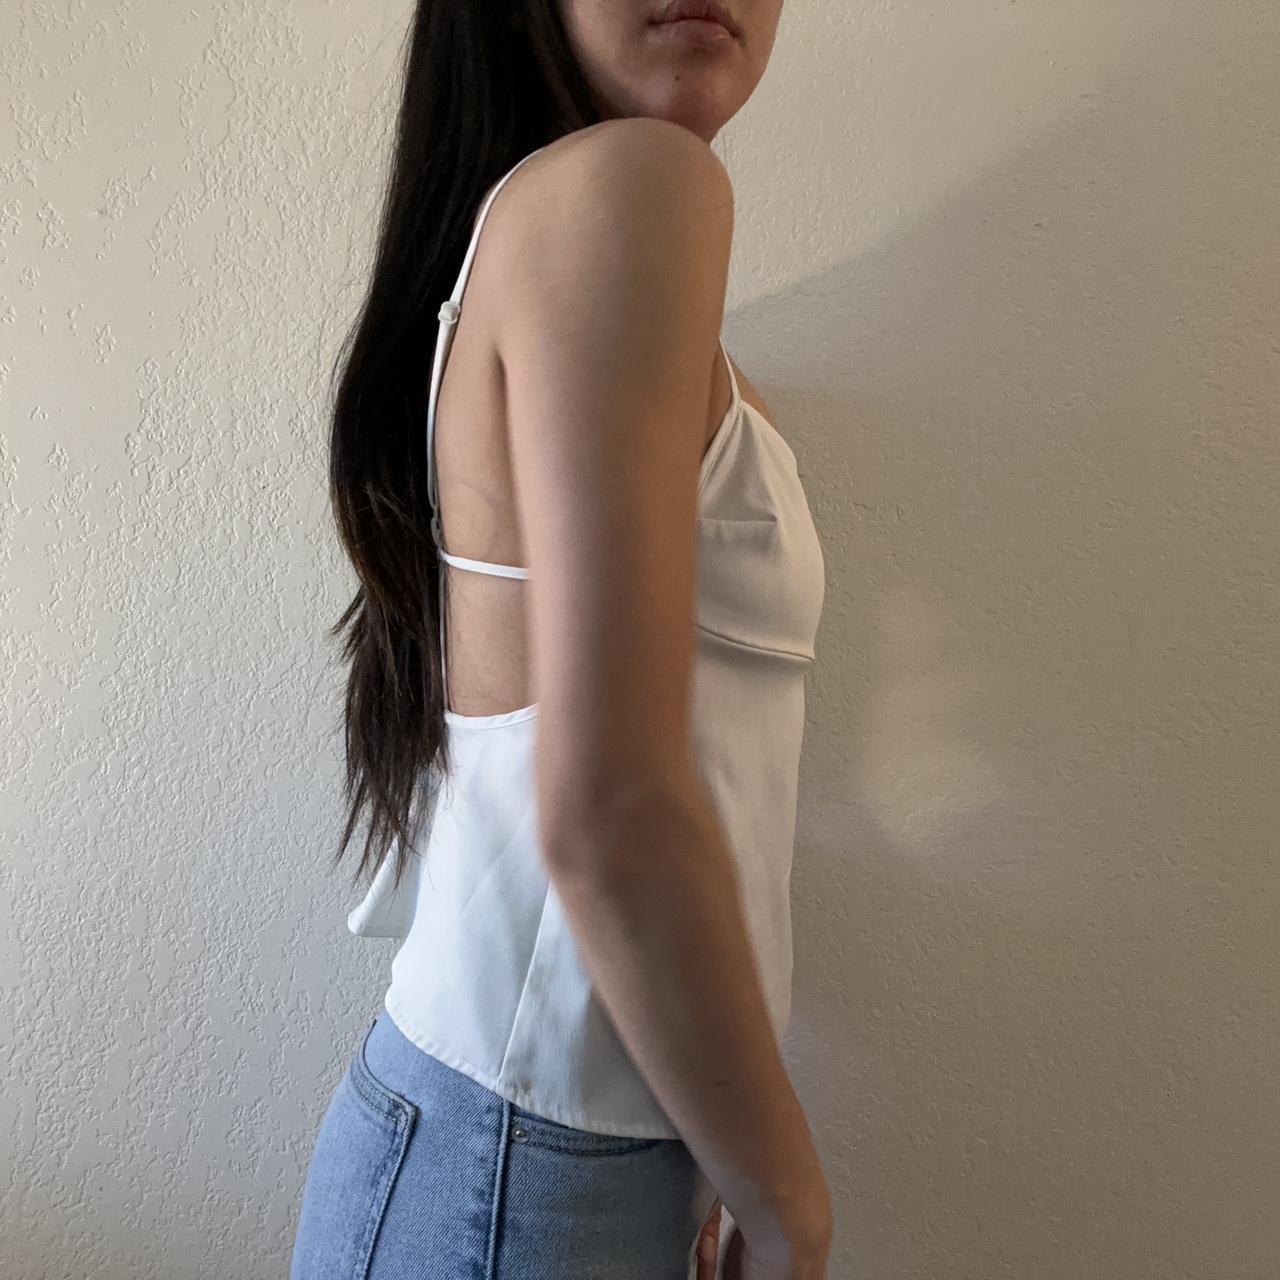 Urban Outfitters Women's White Vest (2)